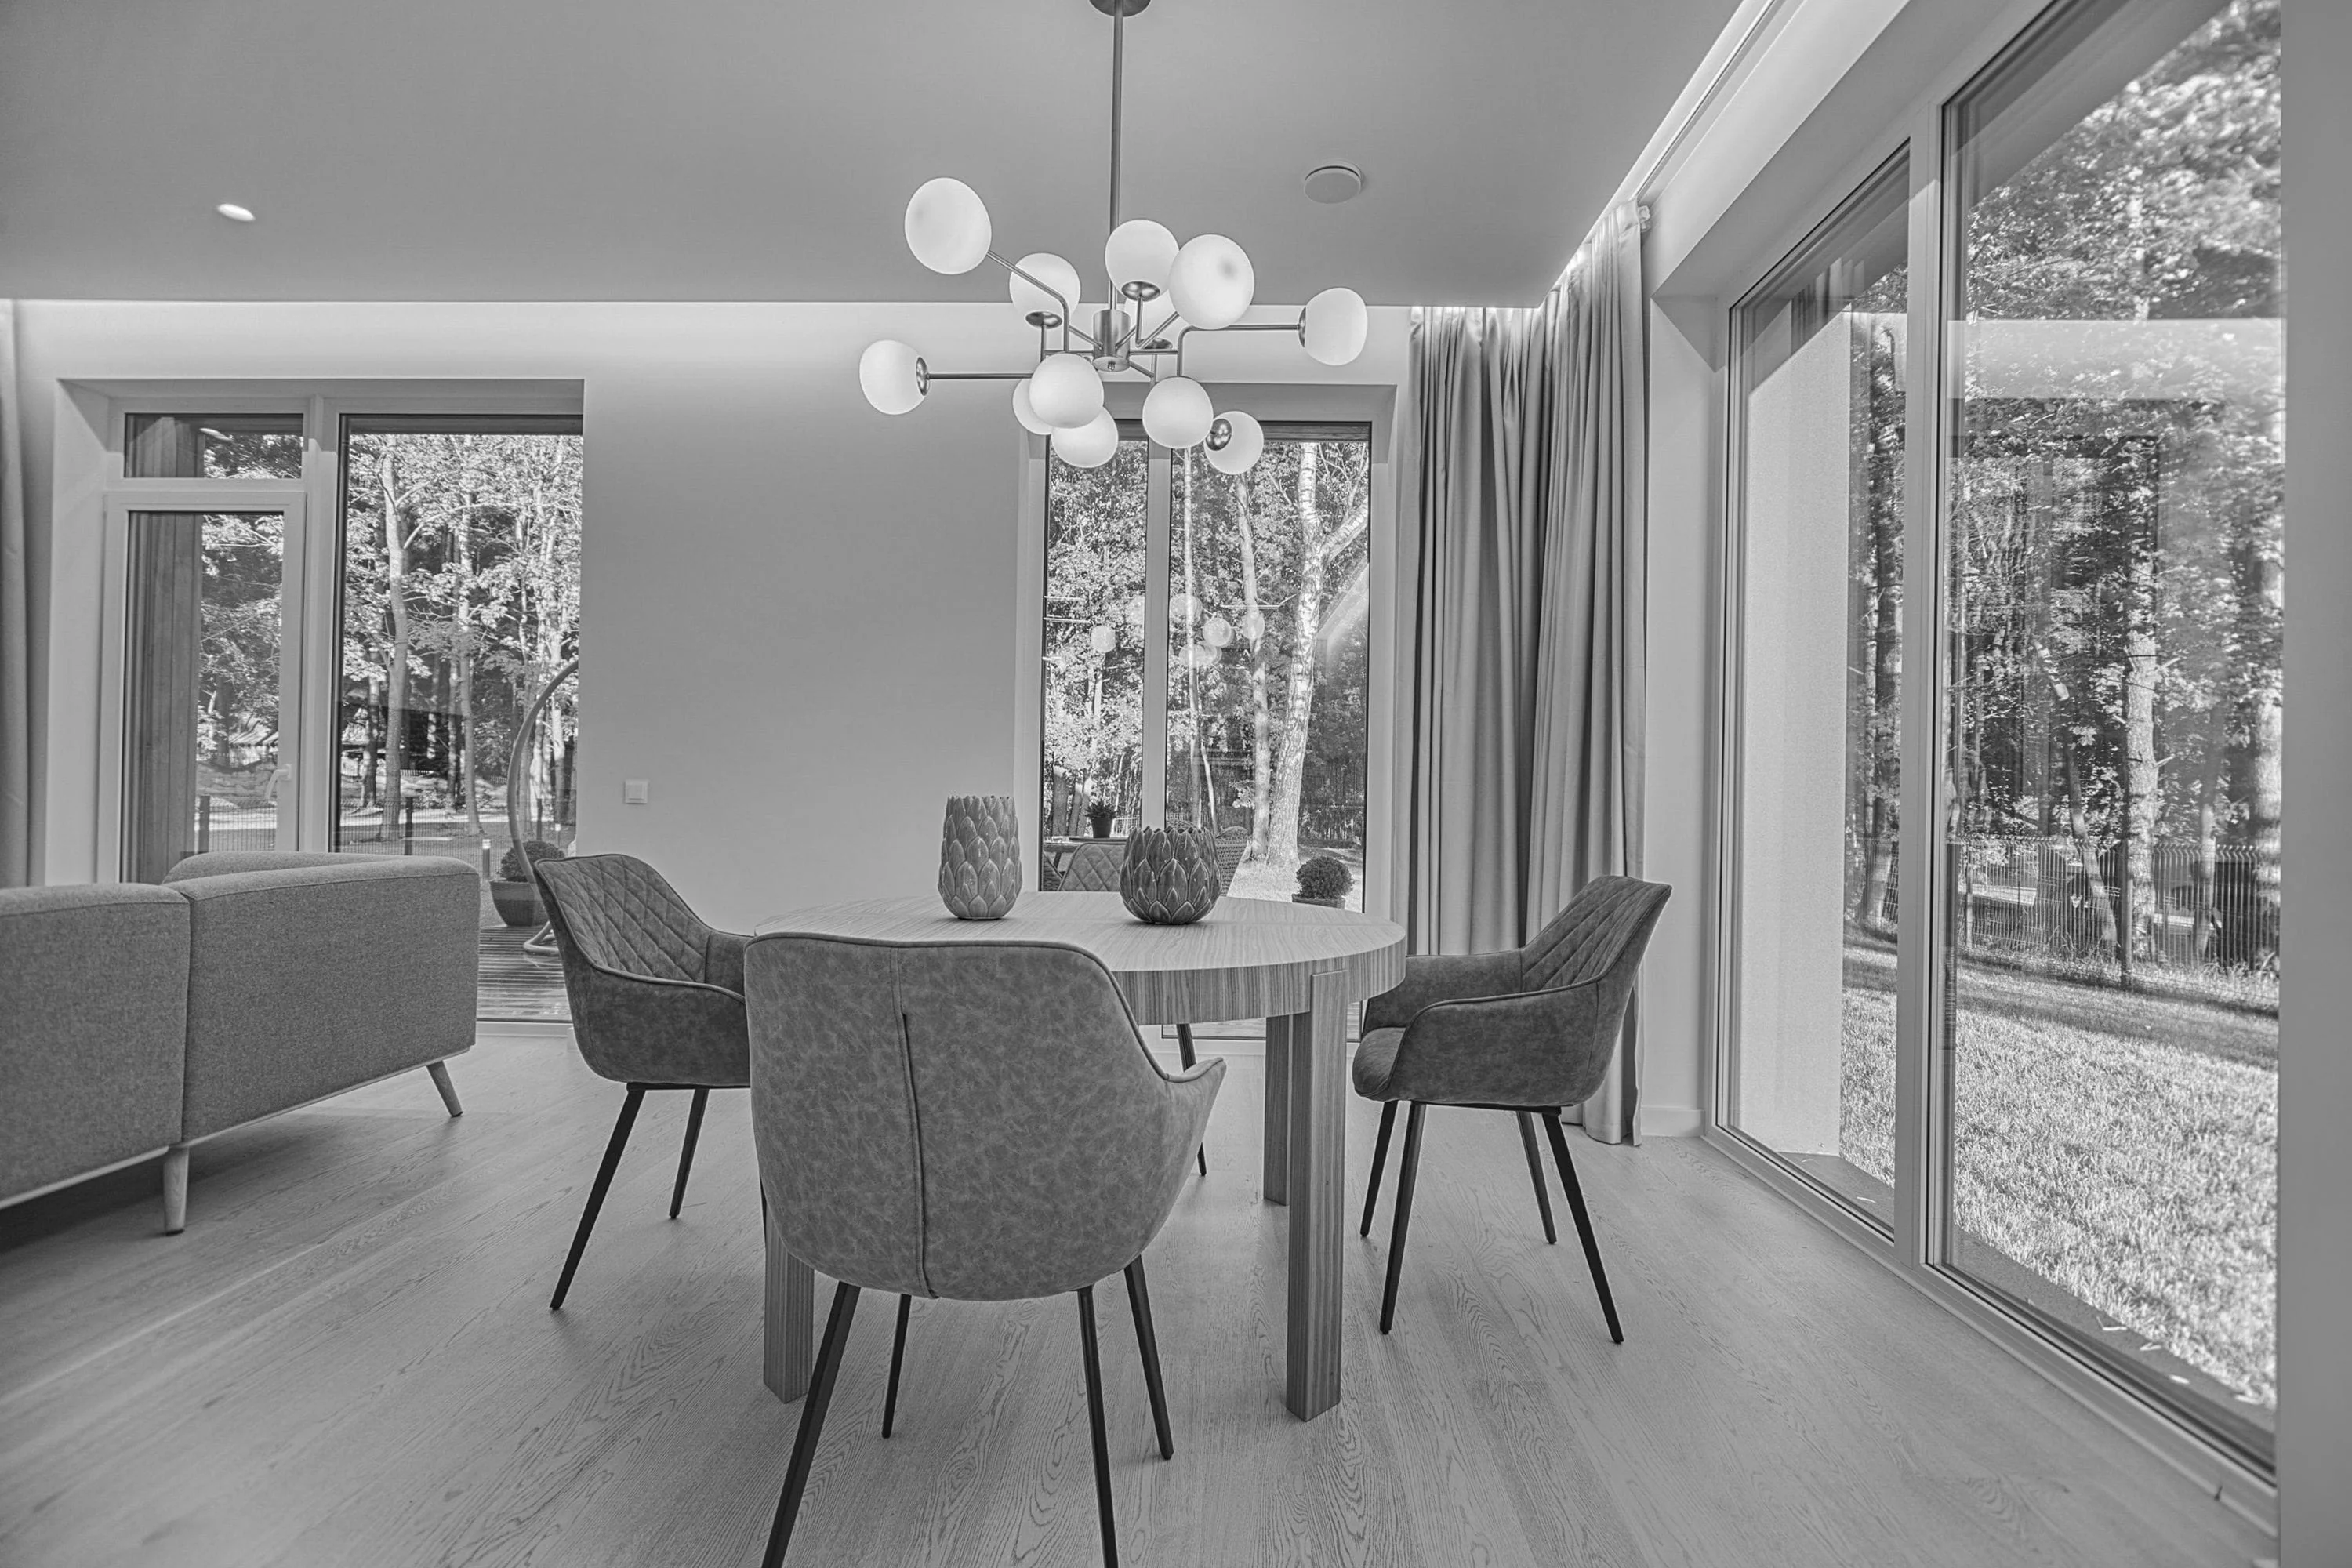 image of dining room displaying real estate photography skills